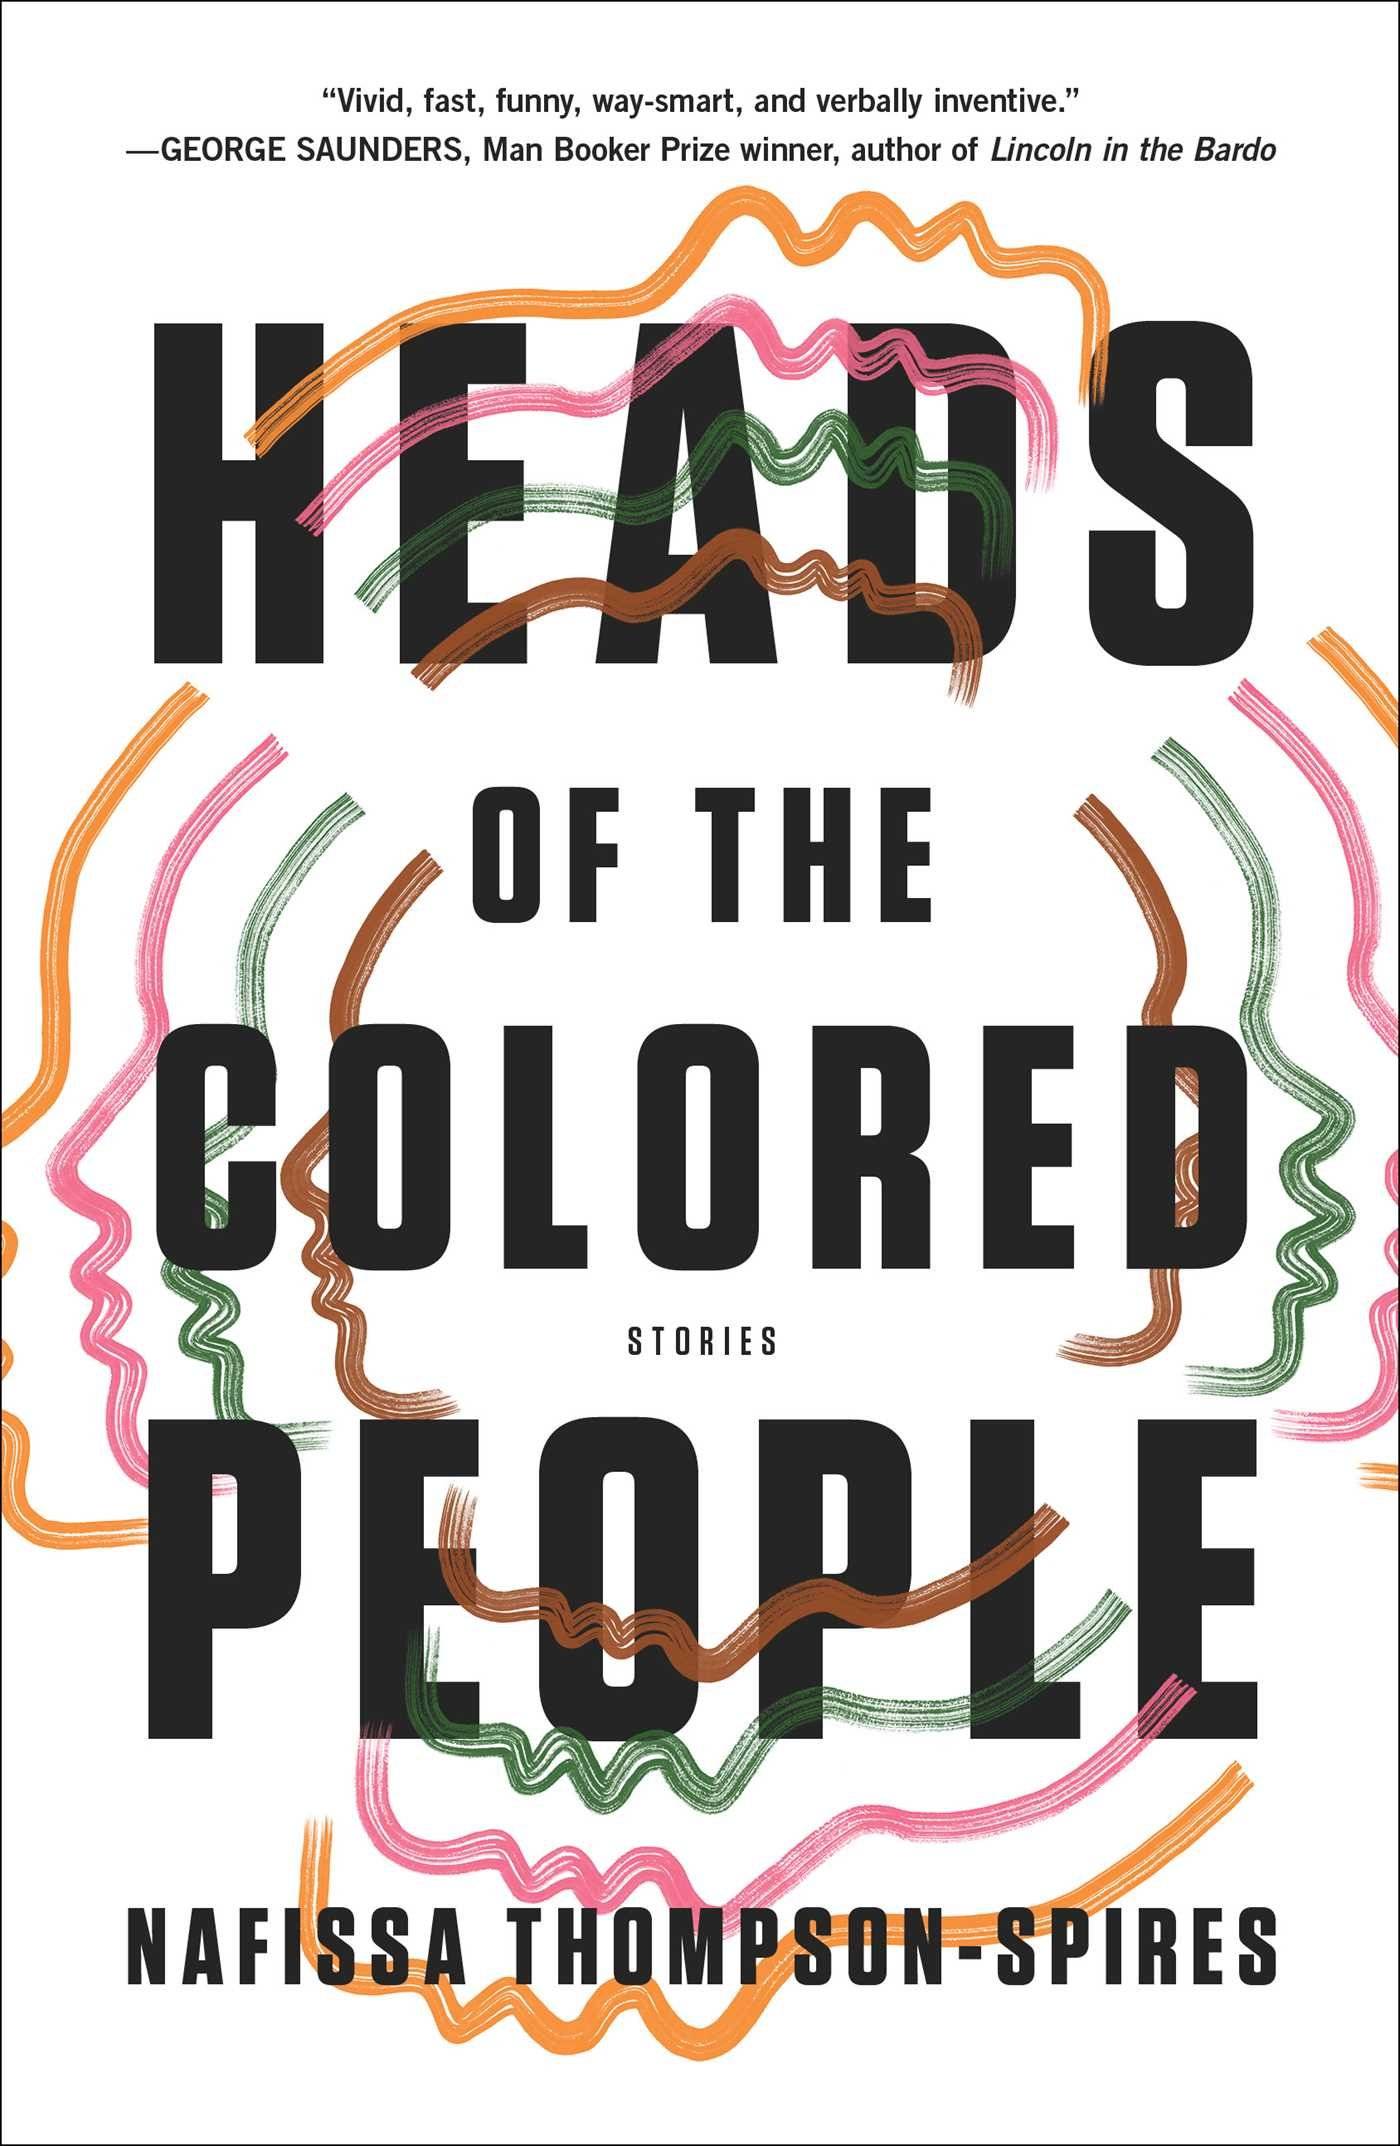 White book cover with colorful outlines in the shapes of a face outline, radiating from the center outward